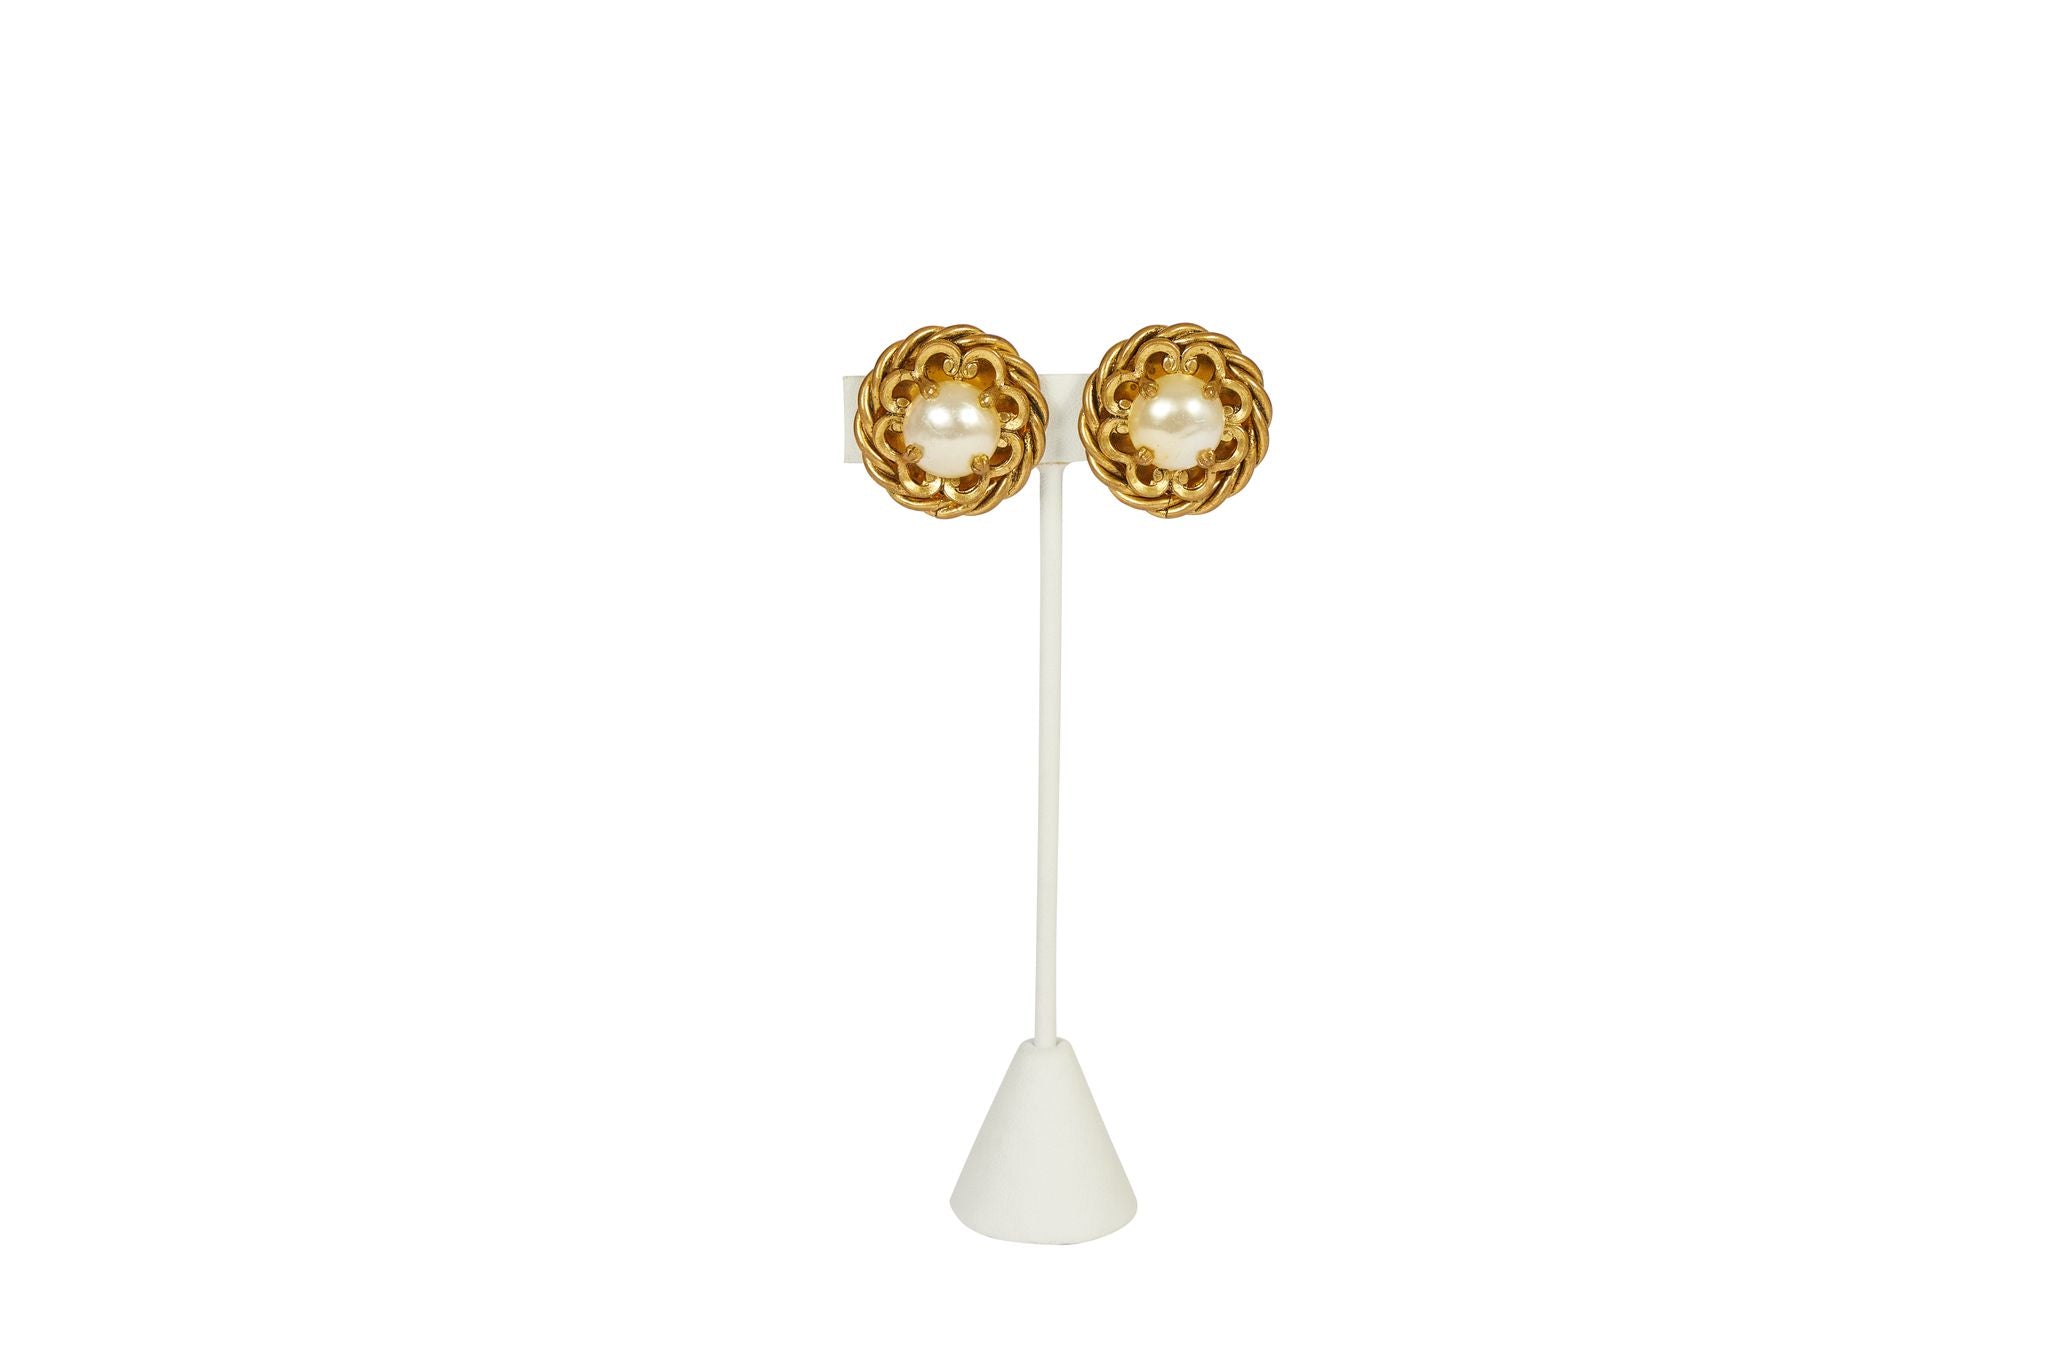 Chanel Vintage Gripoix Earrings - 64 For Sale on 1stDibs  chanel gripoix  earrings, vintage chanel gripoix earrings, chanel gripoix